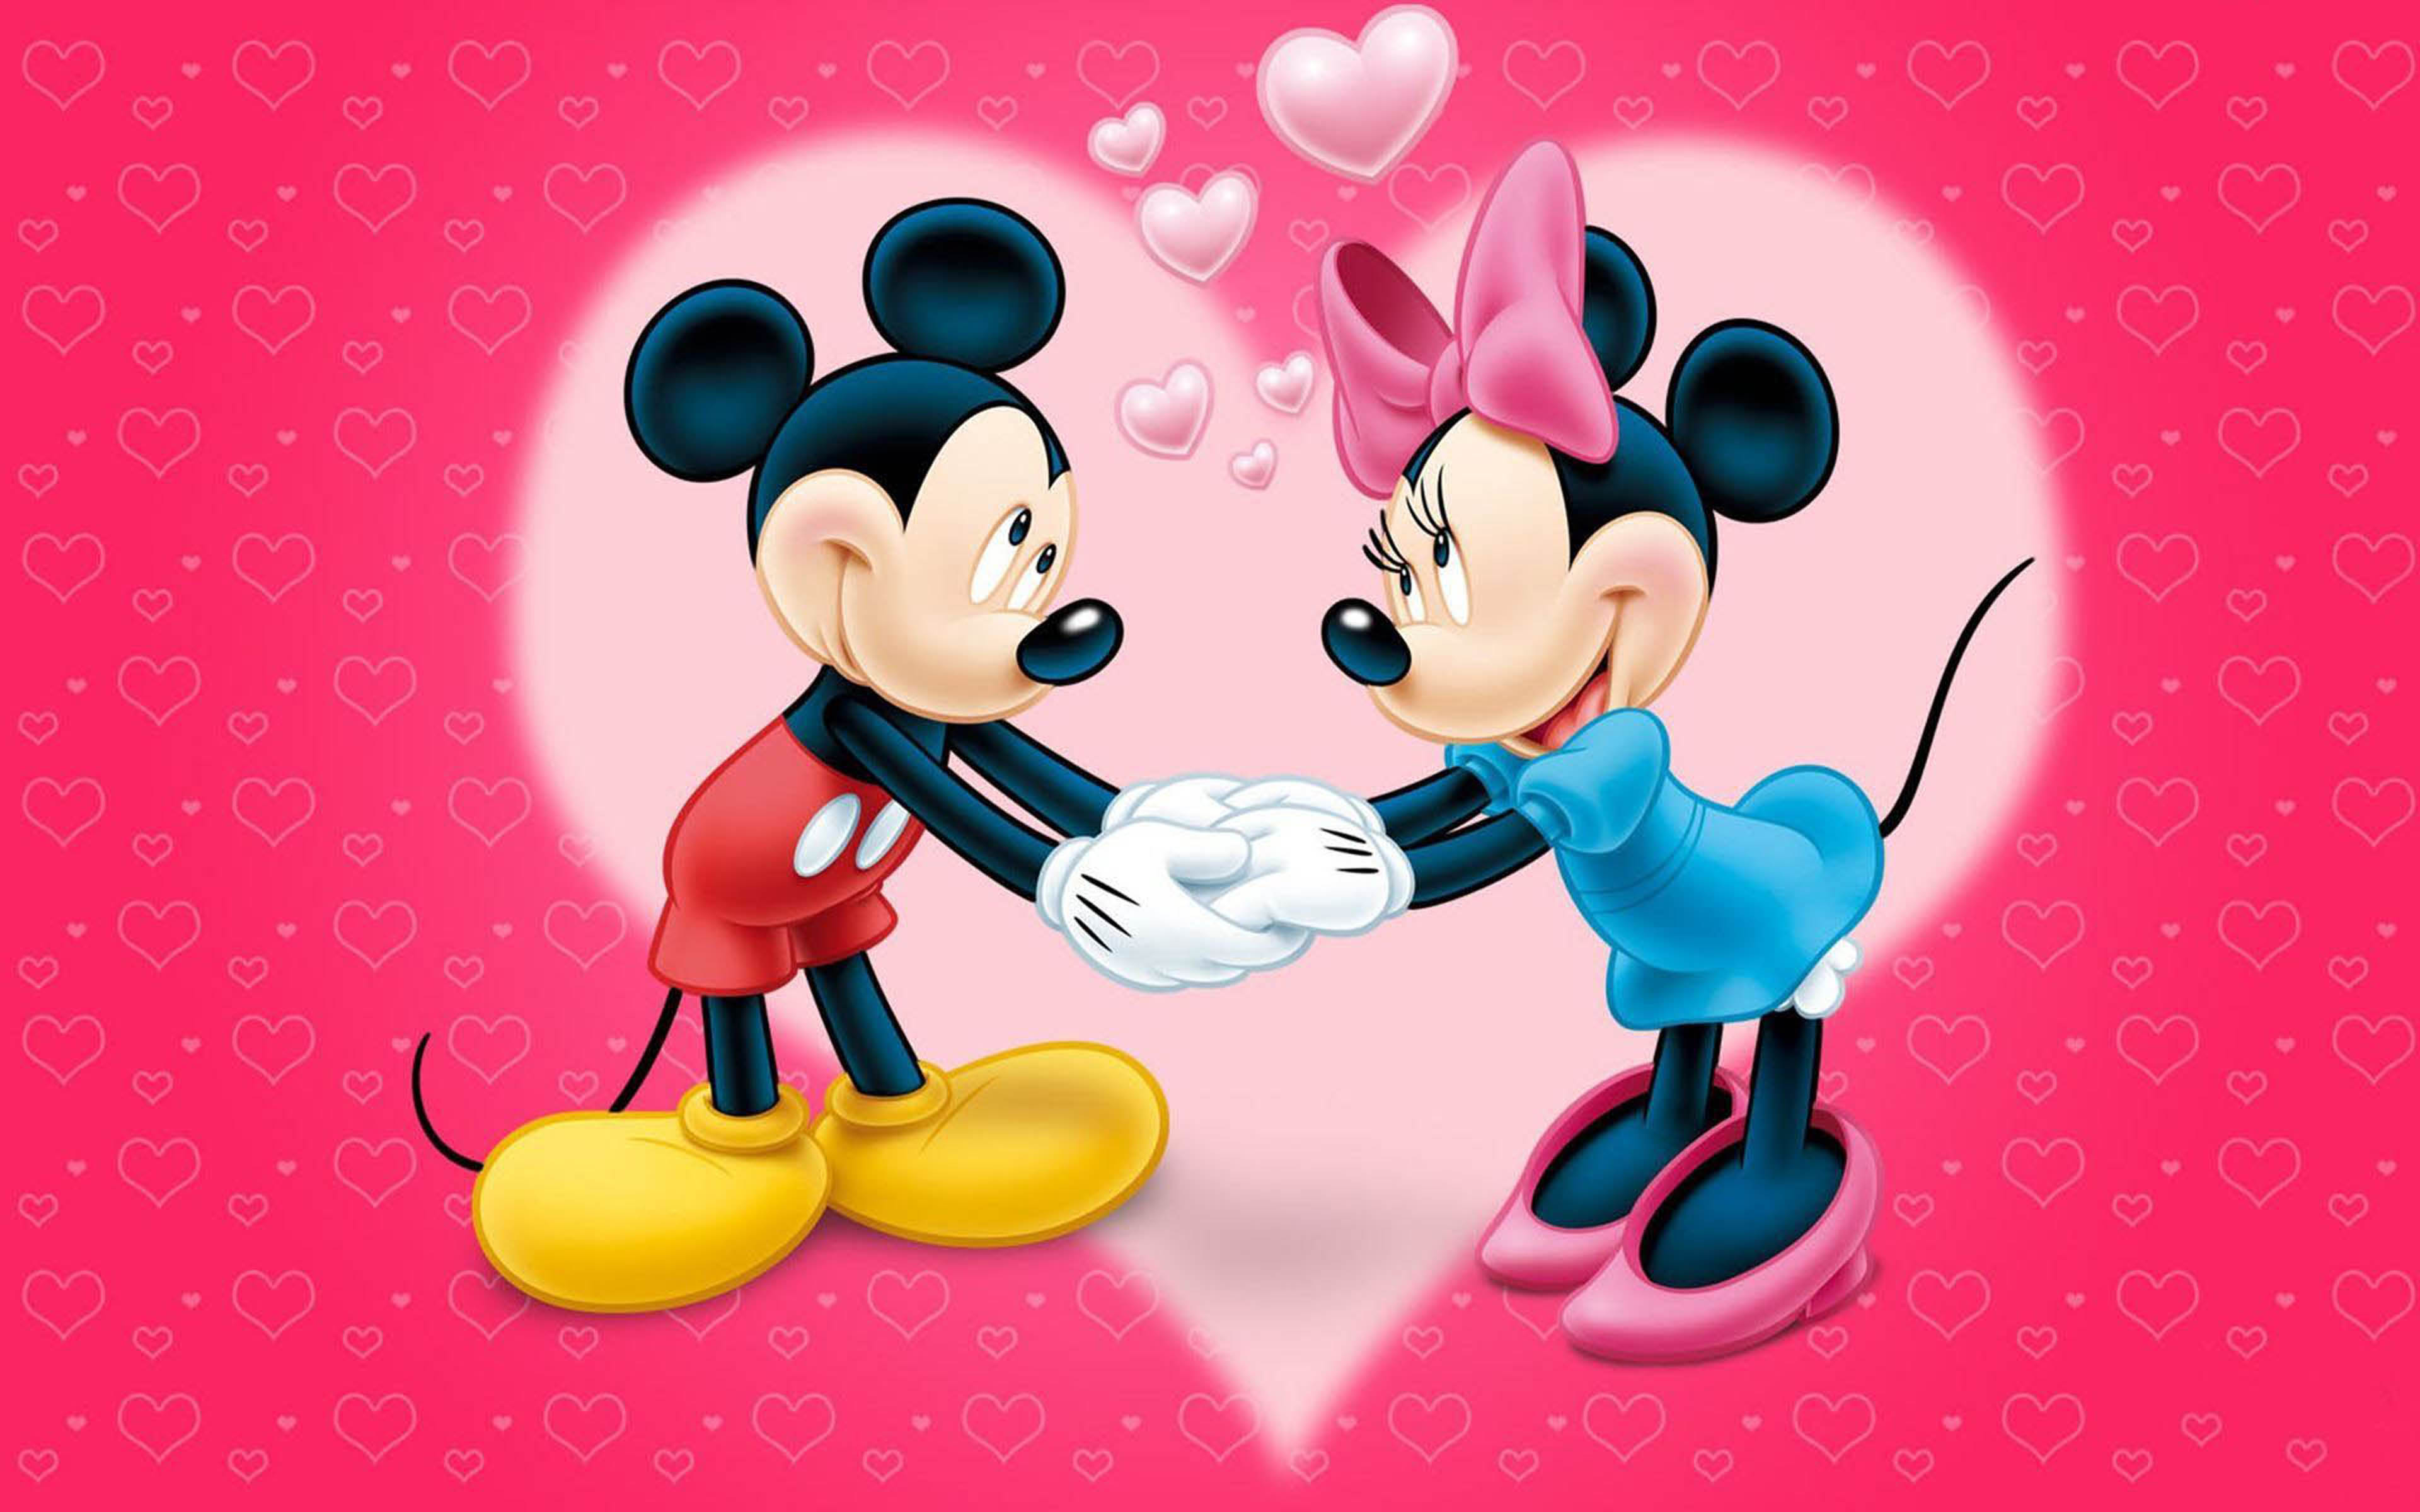 Mickey And Minnie Mouse Love Couple Cartoon Red Wallpaper With Hearts Hd  Wallpaper For Desktop Mobile And Tablet 3840x2400 : 